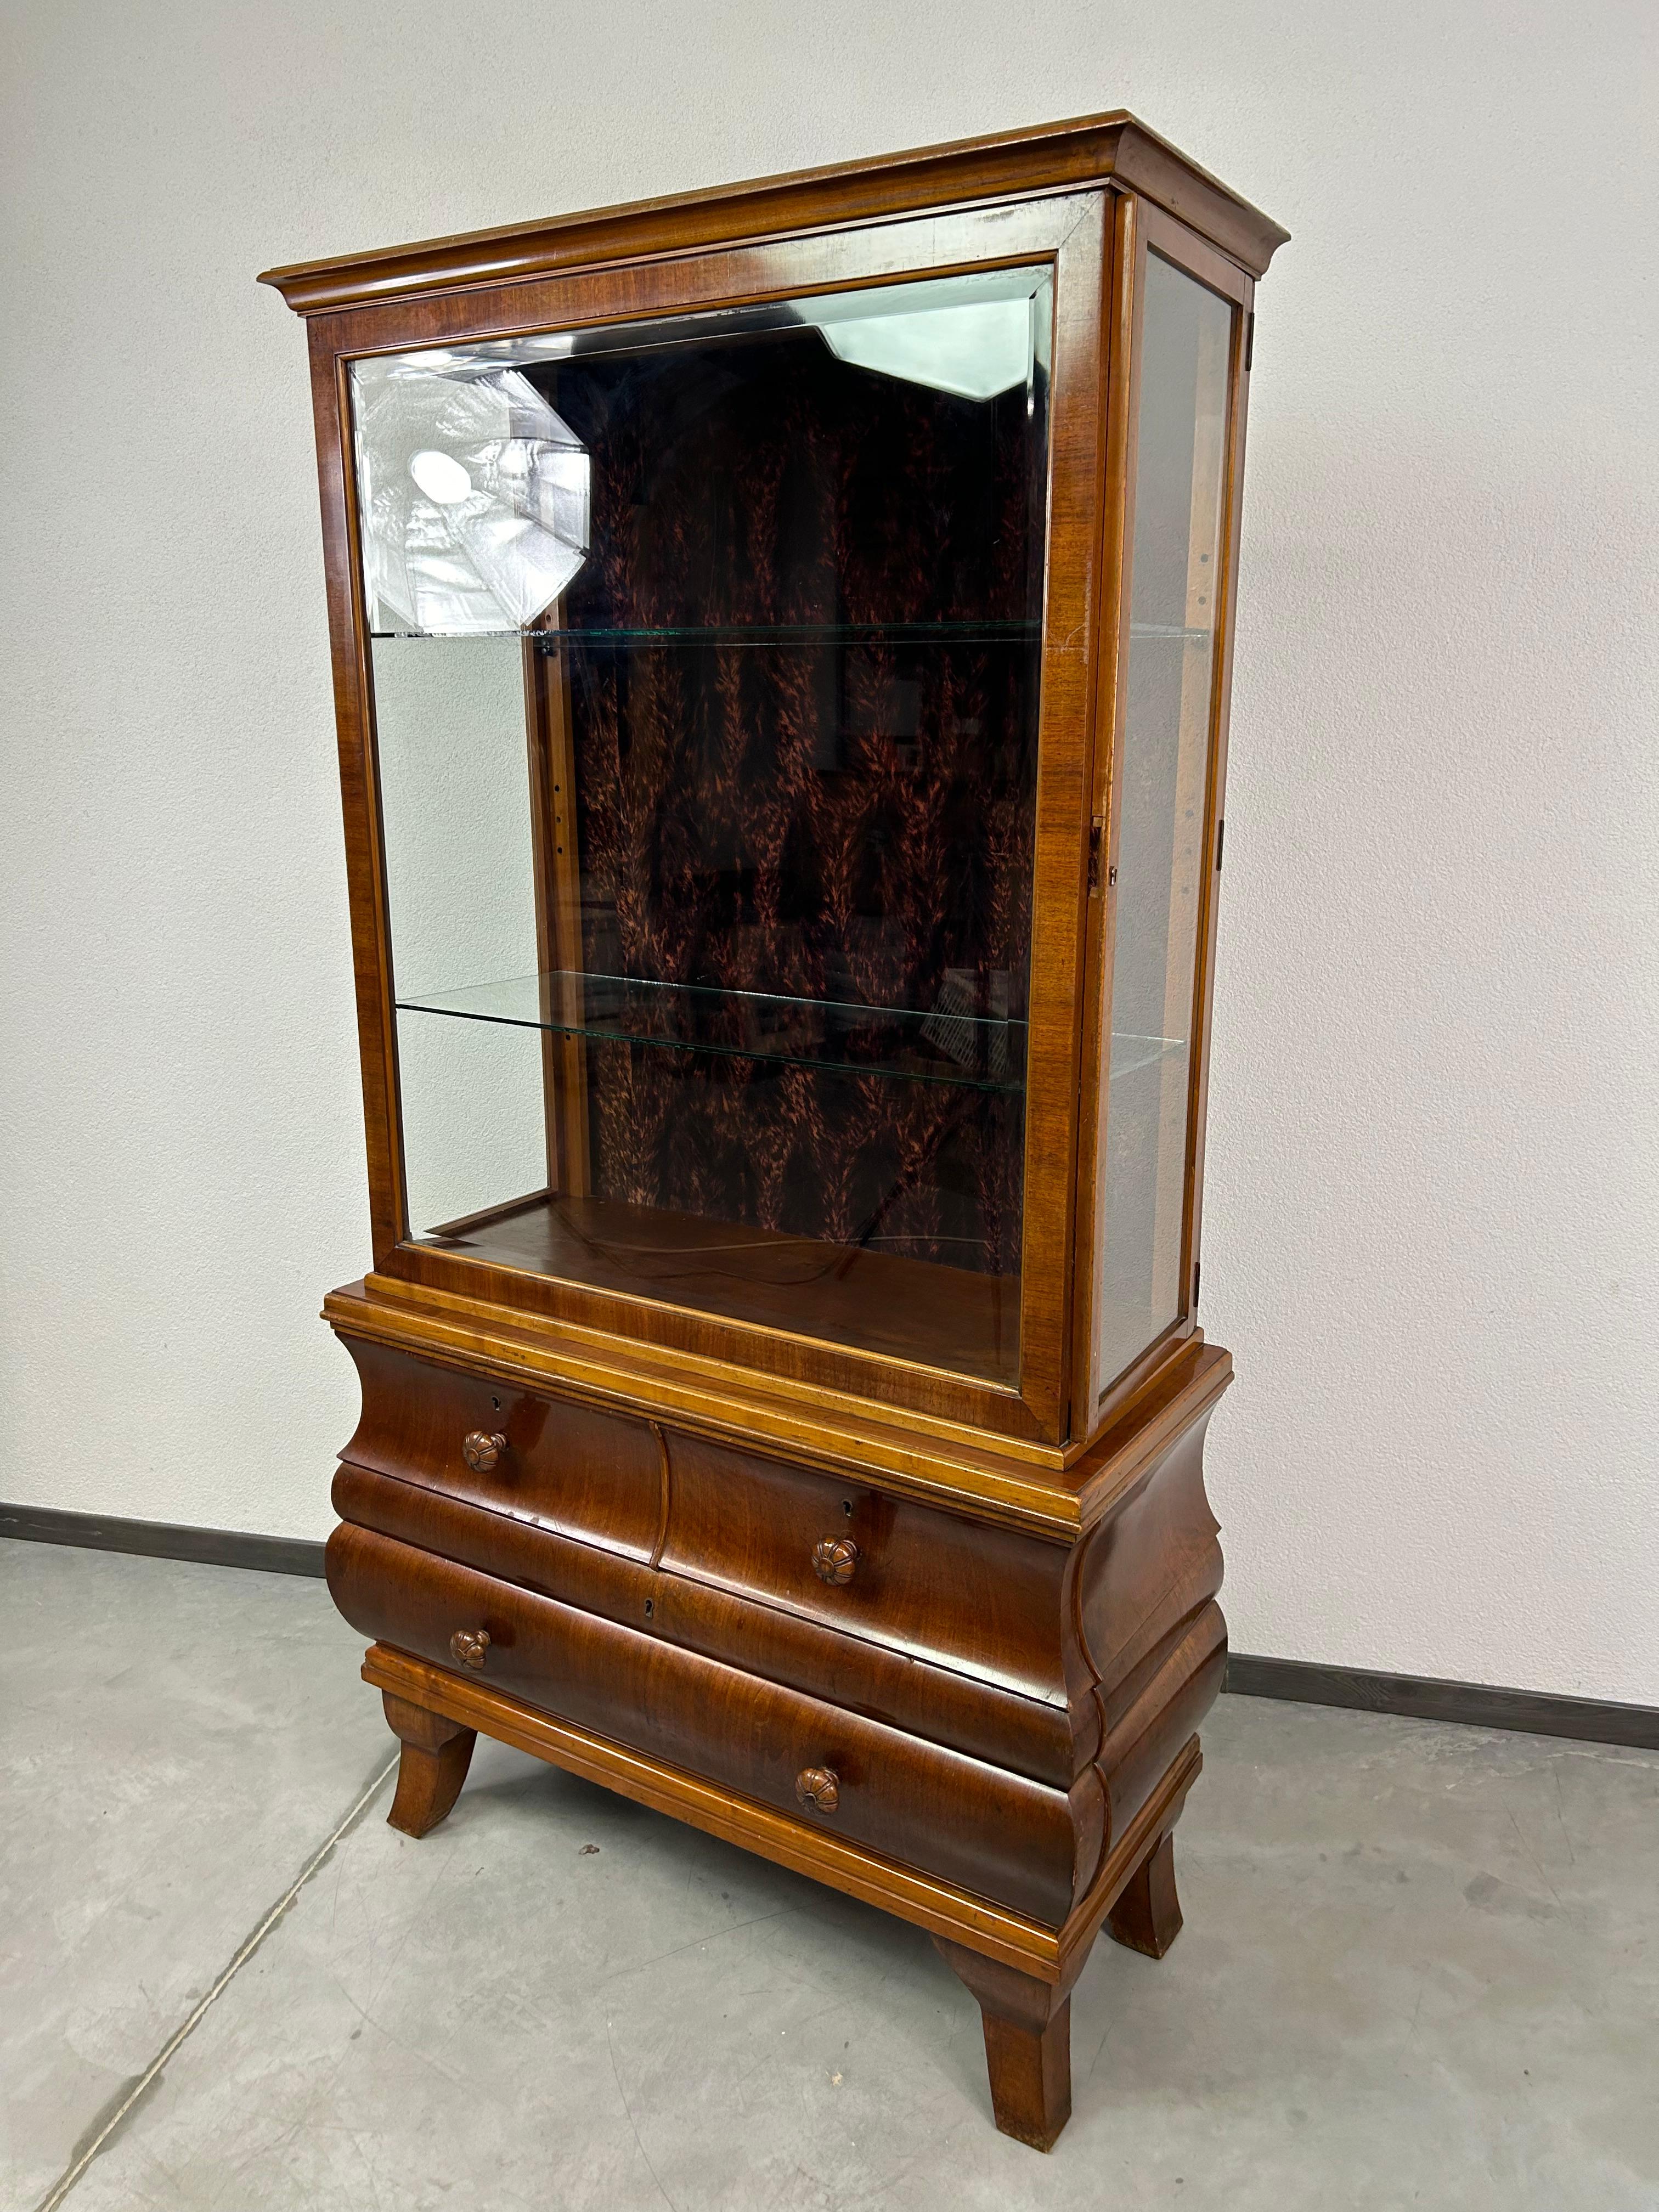 Large art deco vitrine by Lingel in very nice original condition.

The first Hungarian wooden furniture factory was founded in 1864 by Karóly Lingel under the name Lingel Karóly and Sons. Initially they produced wooden goods, mouldings and frames